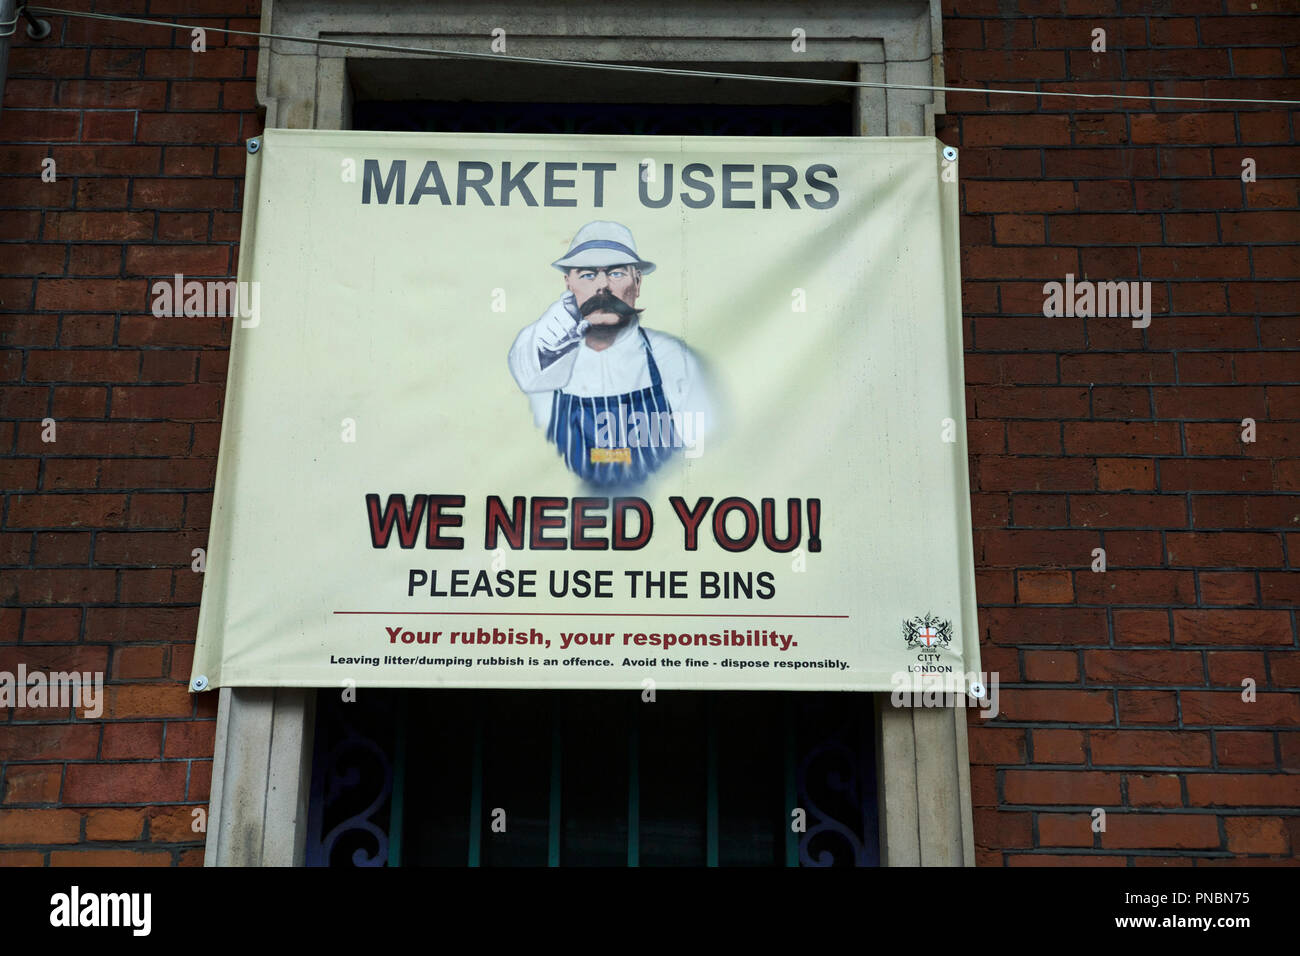 Litter sign at Smithfield Market London: Market Users Please Use the Bins. Your rubbish, your responsibility. Information sign uk. Stock Photo